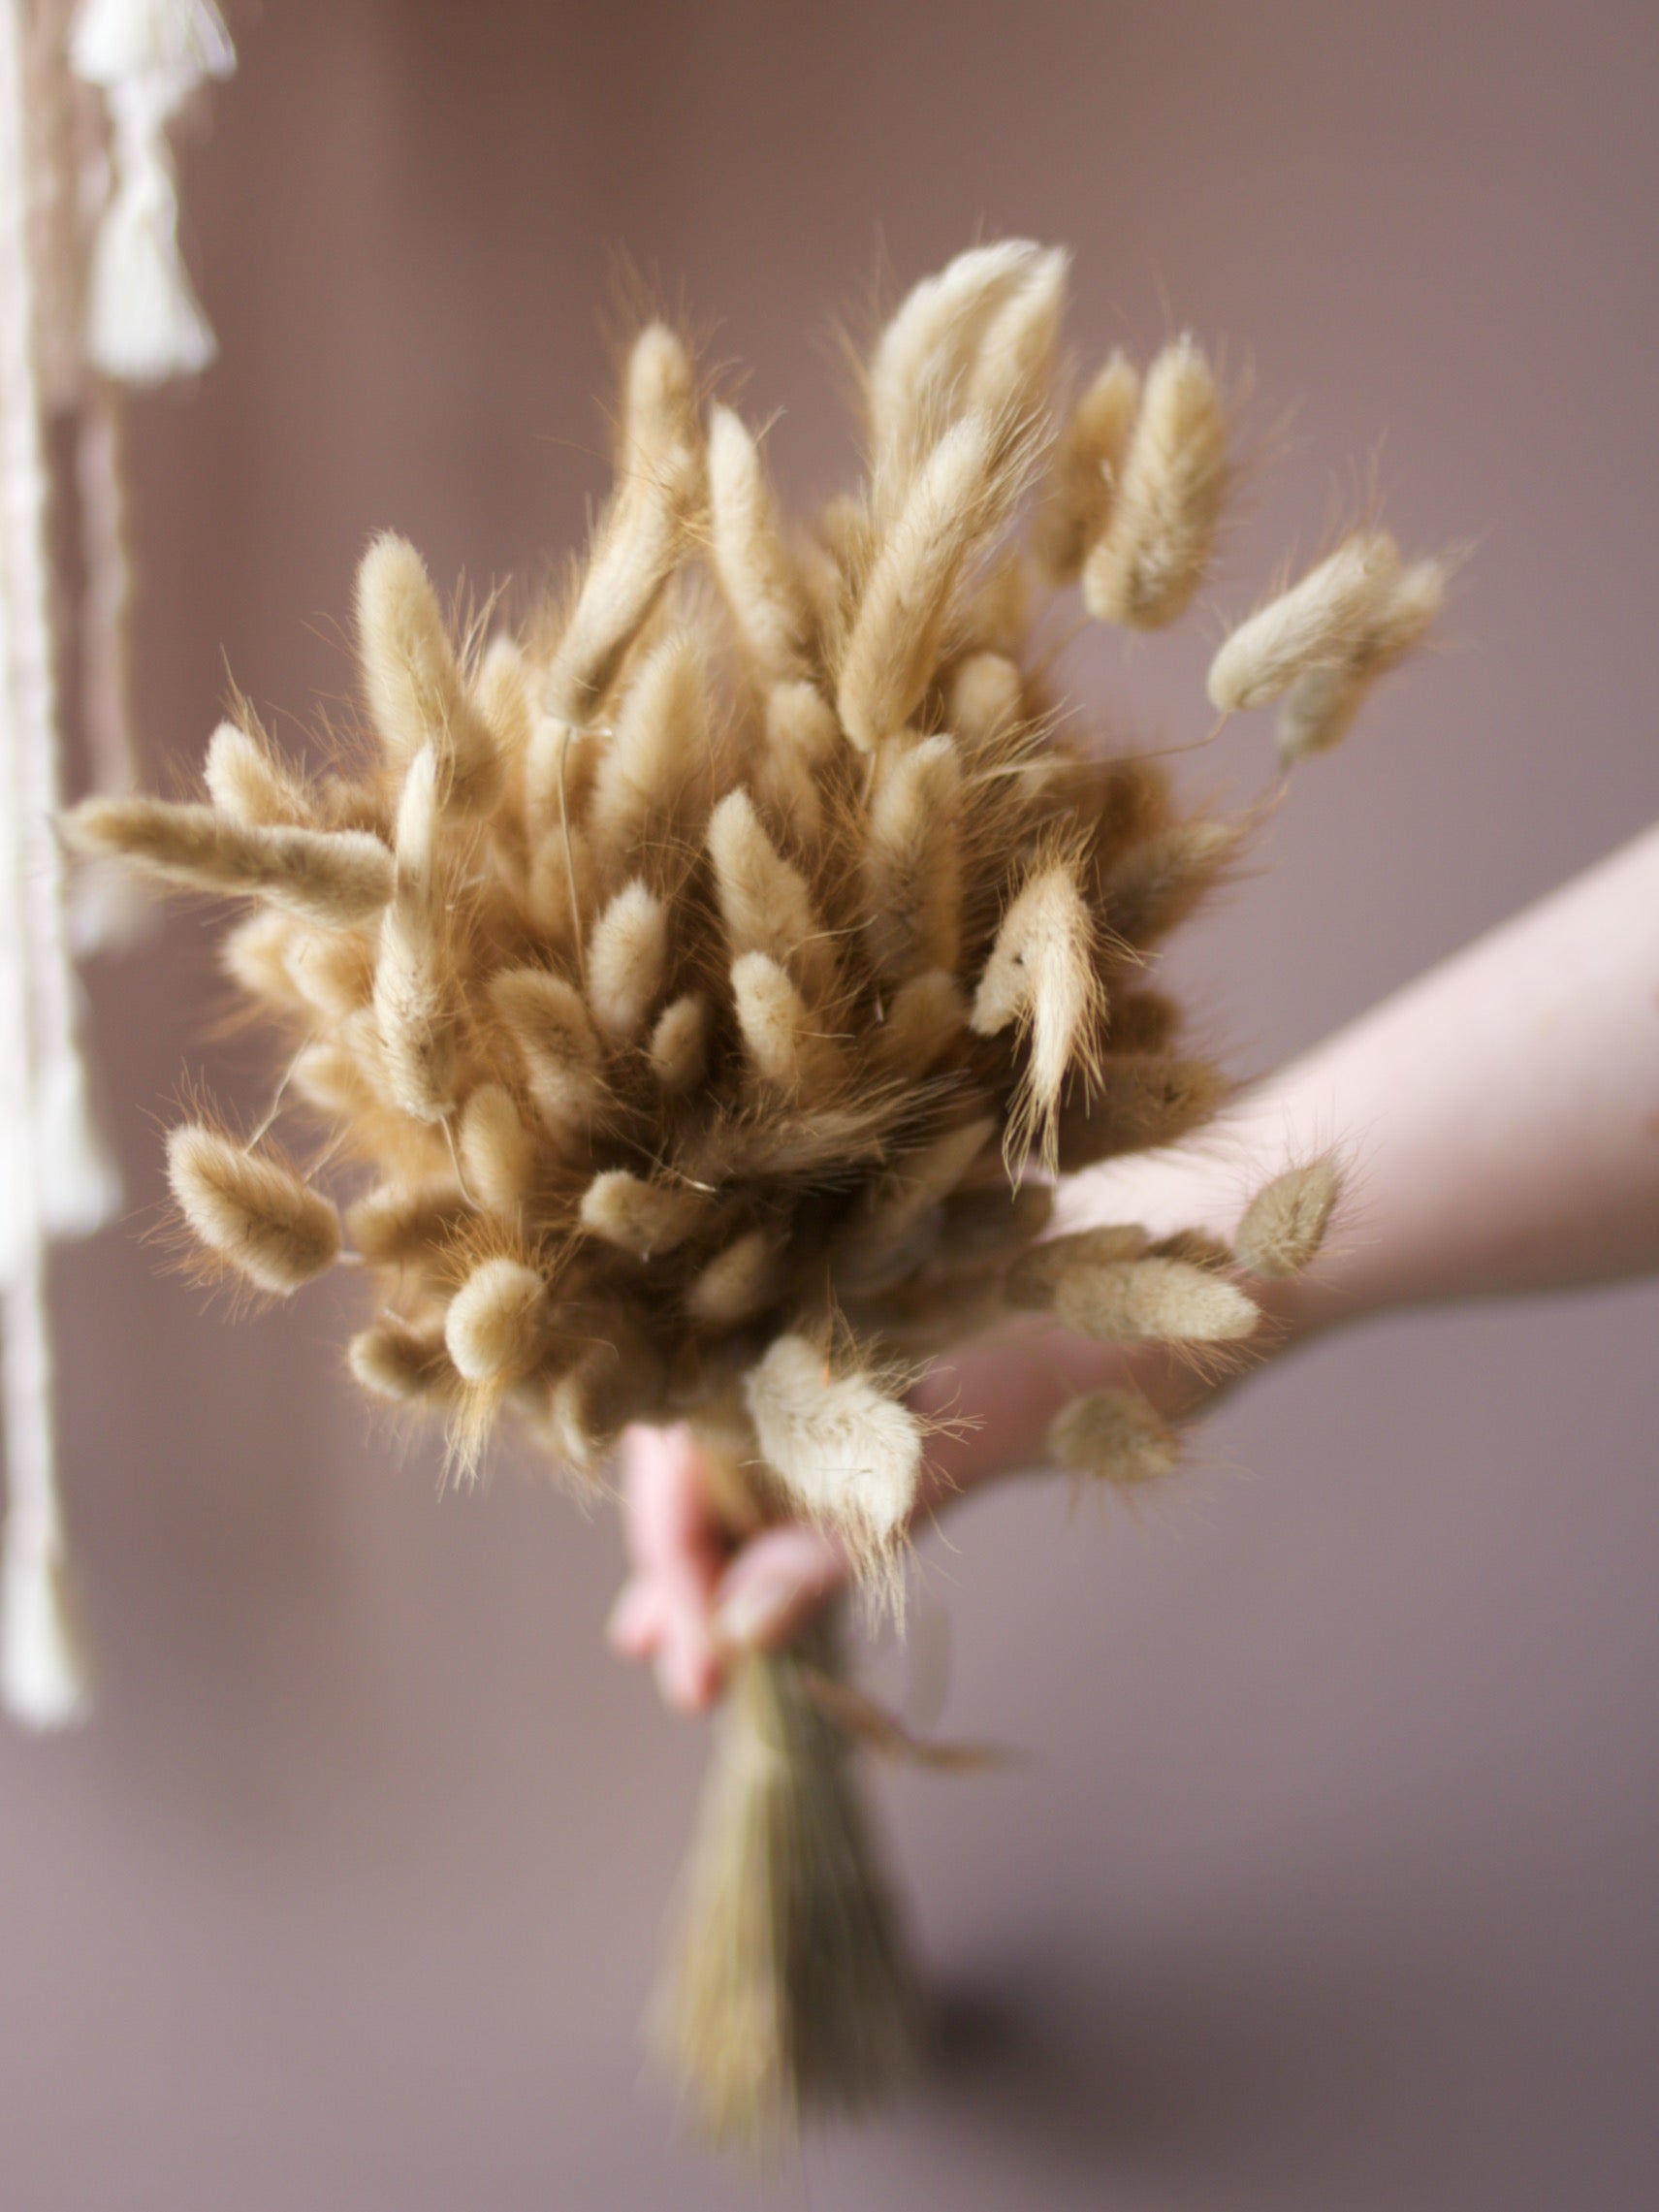 Dried bunny tails